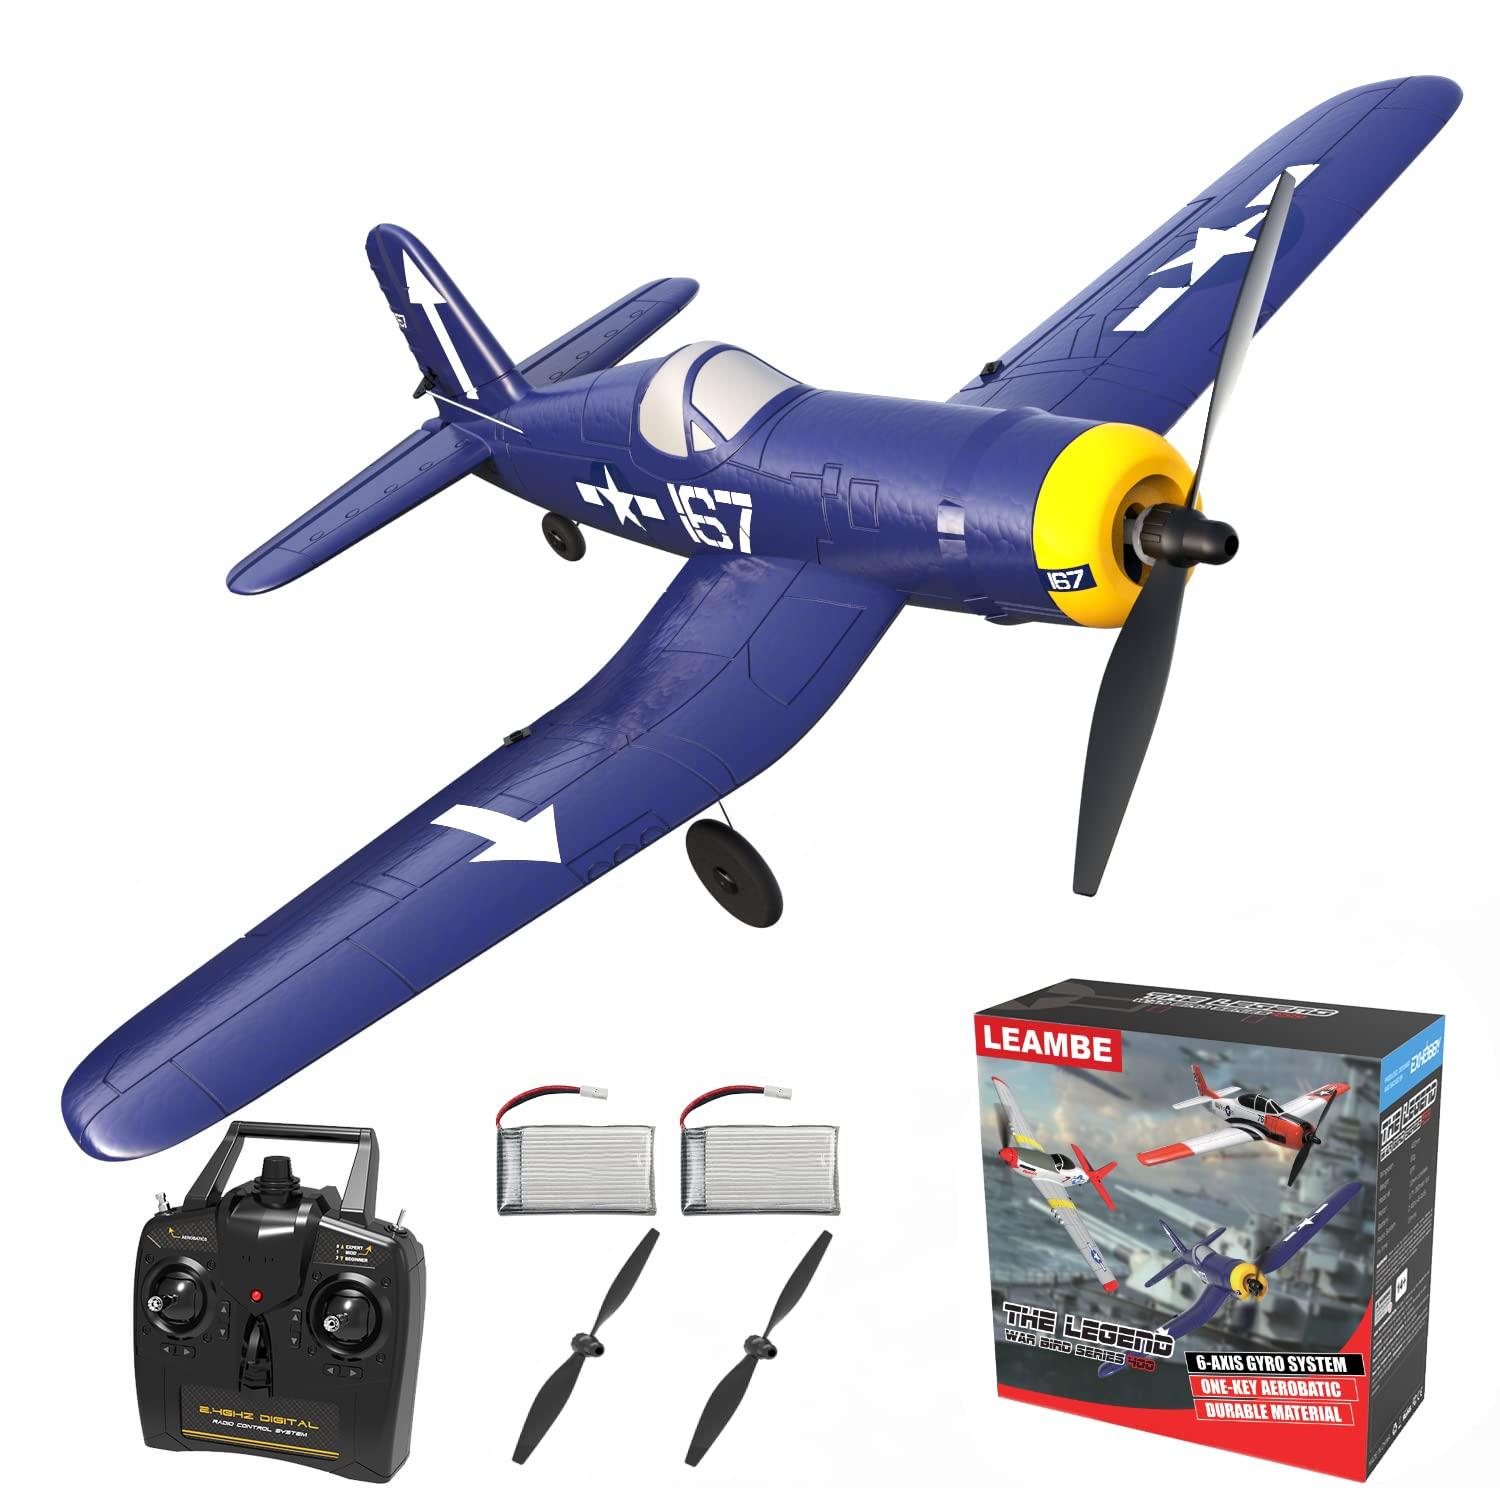 Remote Plane Toy: Types of Remote Control Planes